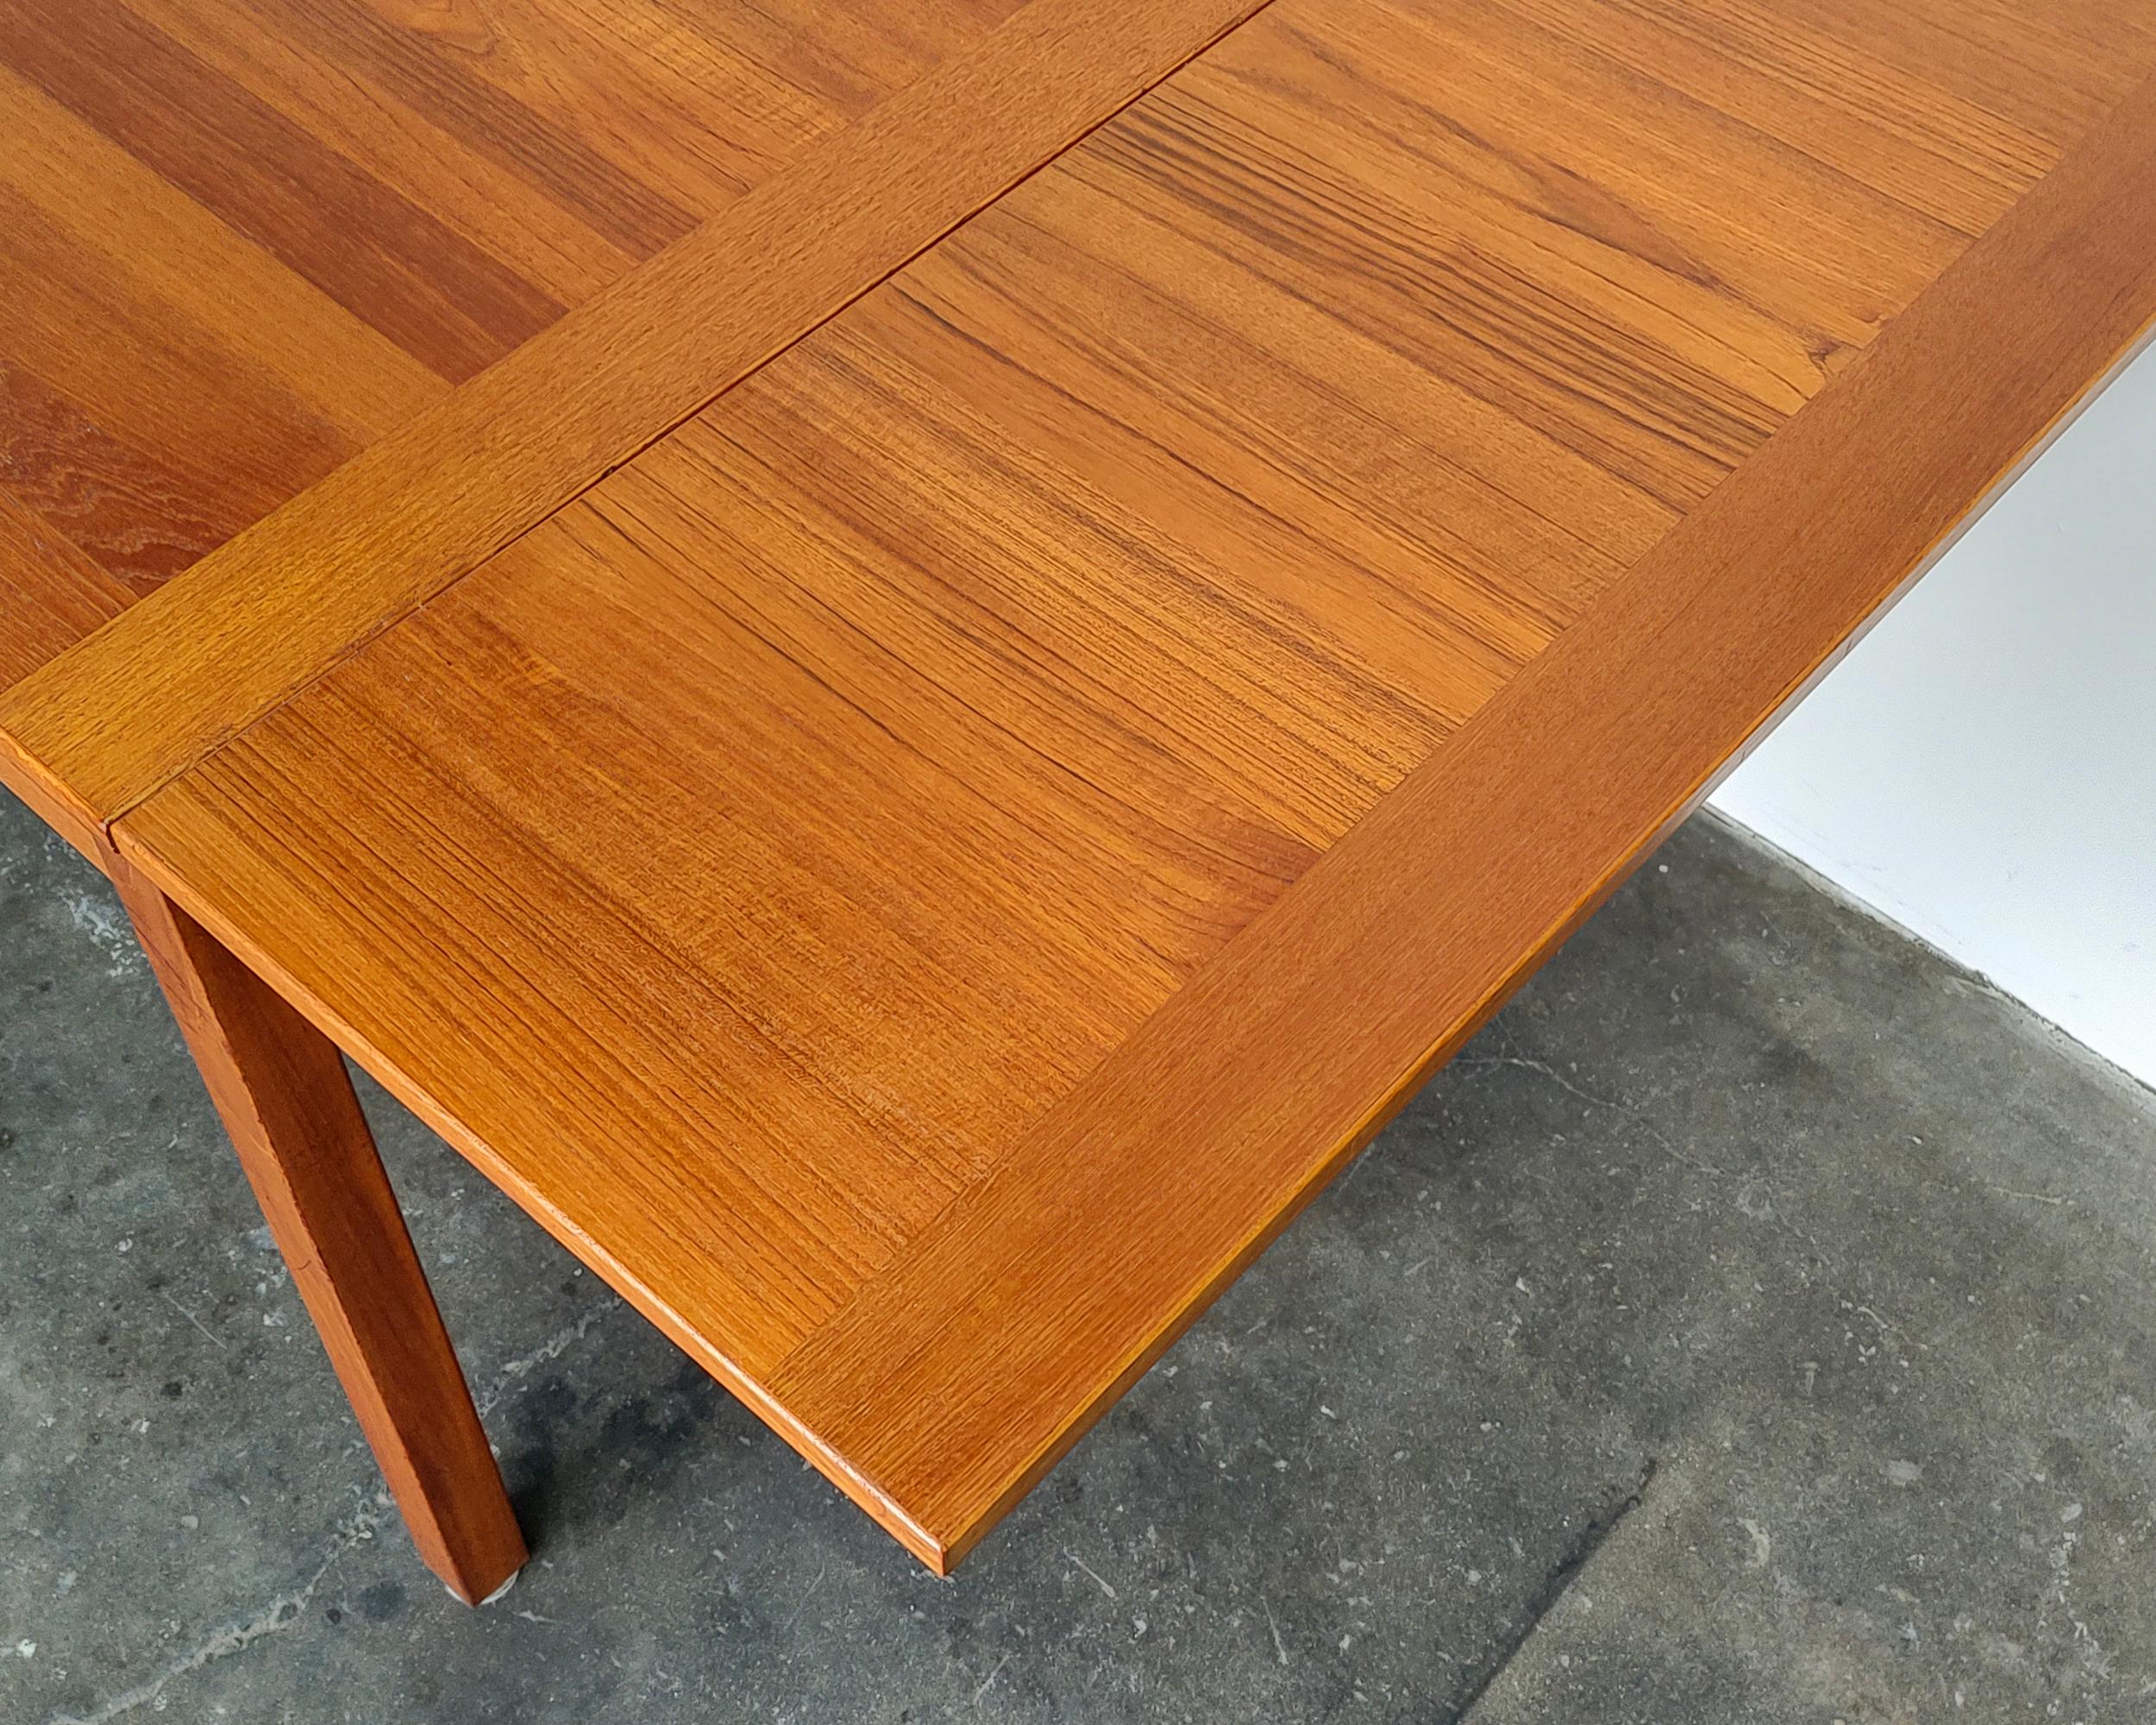 Mid-Century Modern Teak Wood Expanding Teak Dining Table 1960s In Good Condition For Sale In Hawthorne, CA